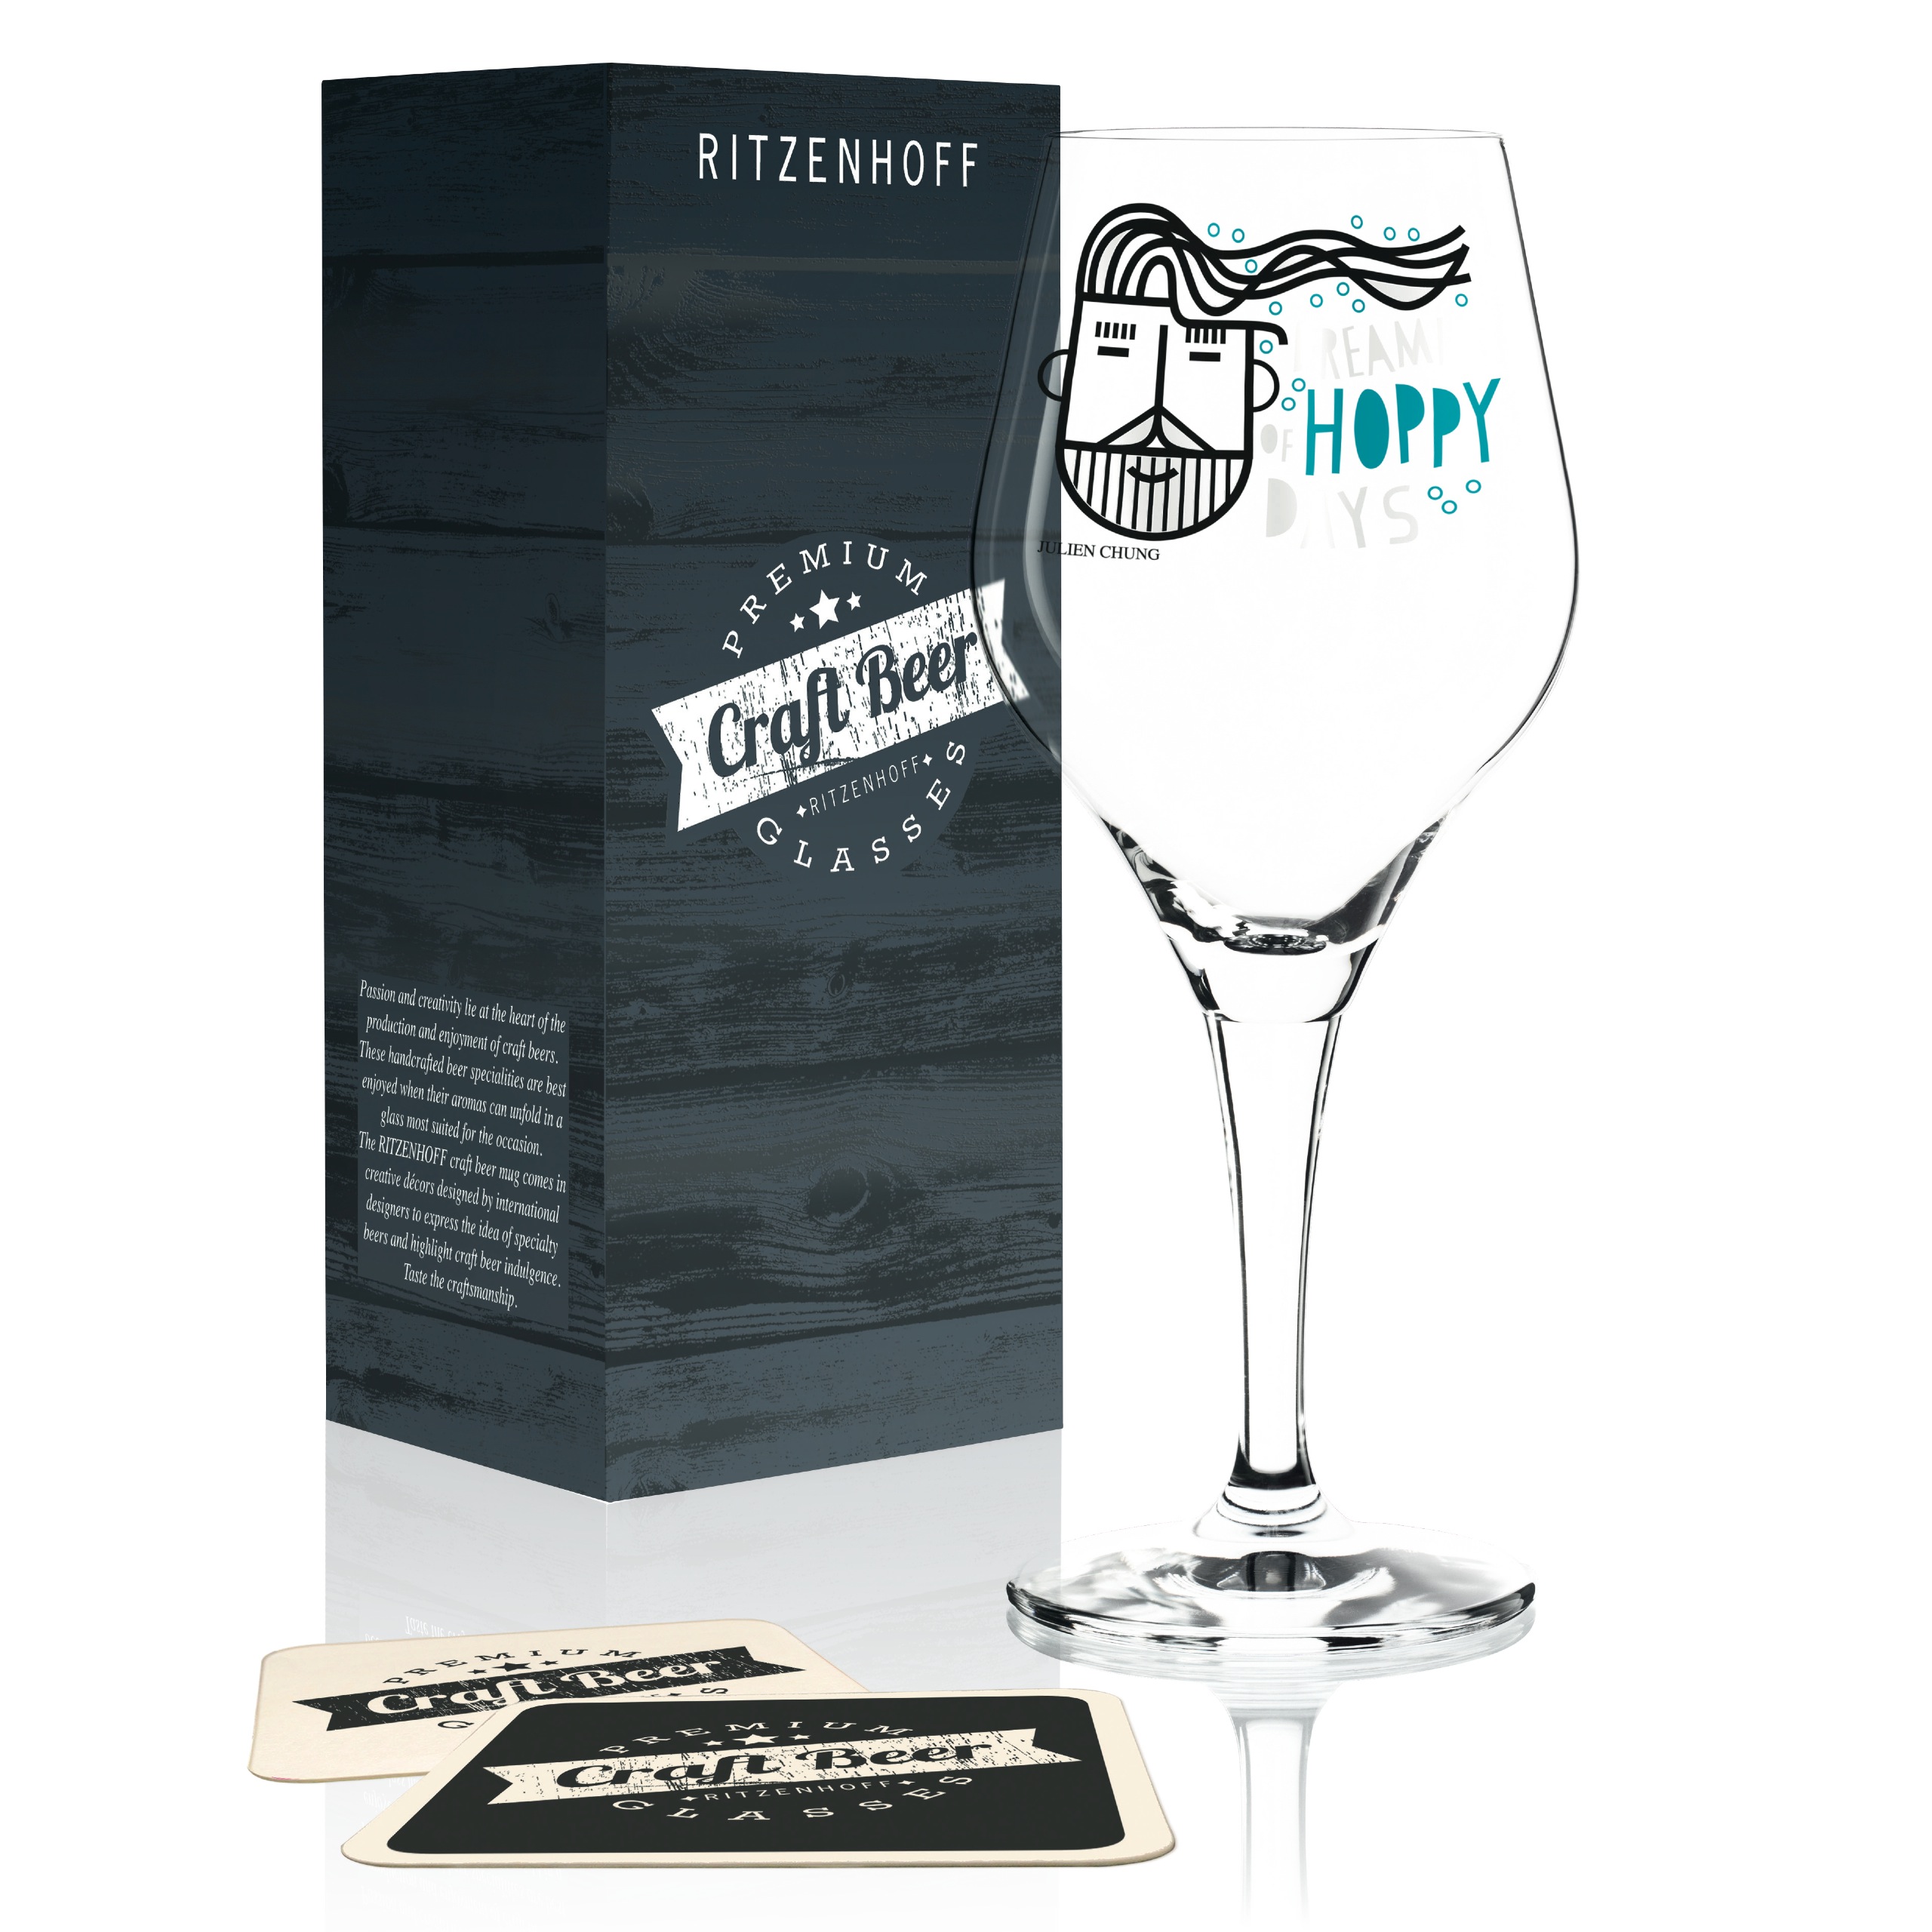 Ritzenhoff Craft Beer beer glass by J. Chung 2018 – Craft Box Direct